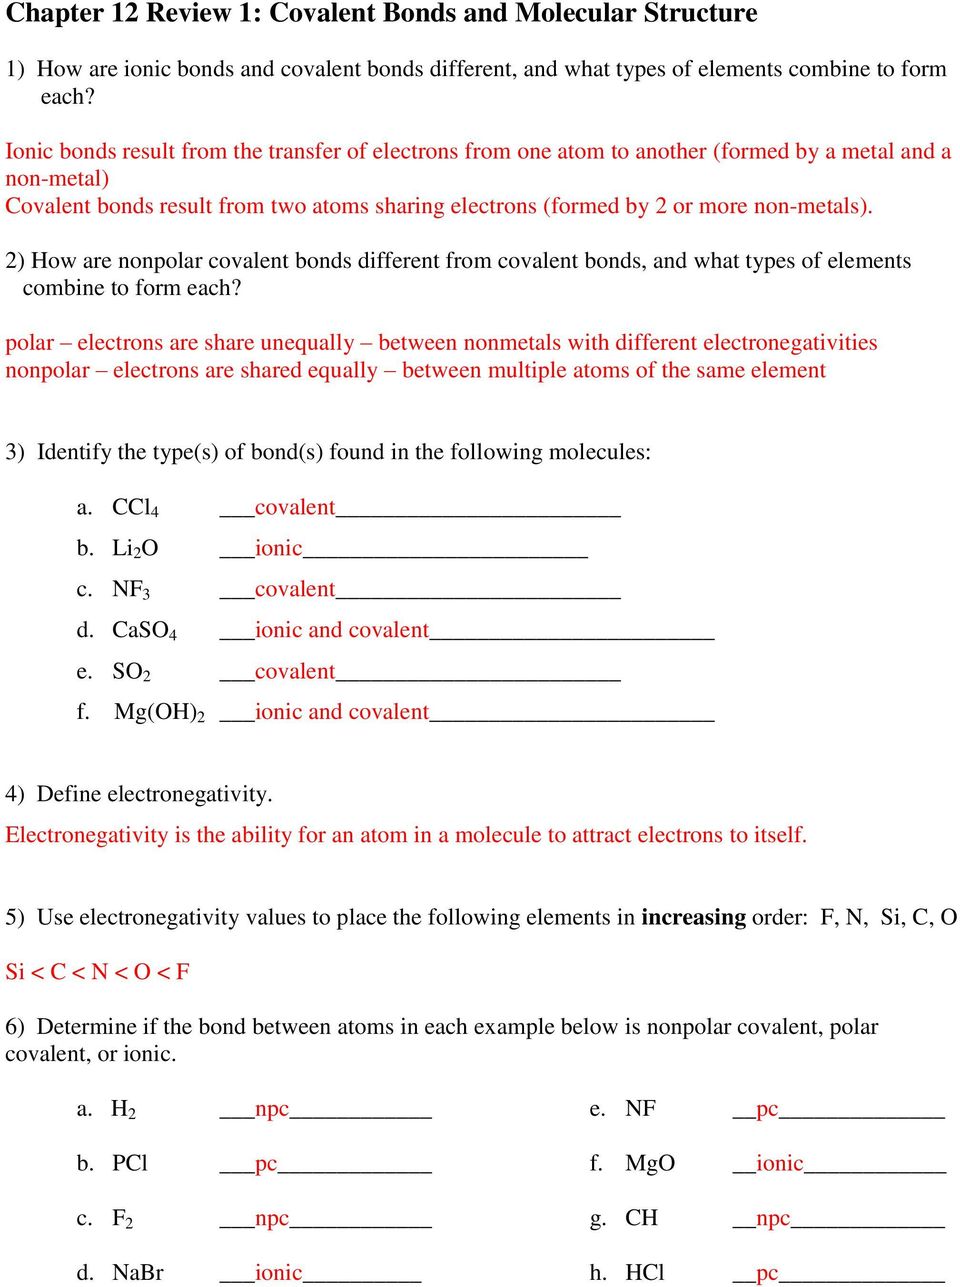 Chapter 24 Review 24: Covalent Bonds and Molecular Structure - PDF Pertaining To Worksheet Polarity Of Bonds Answers